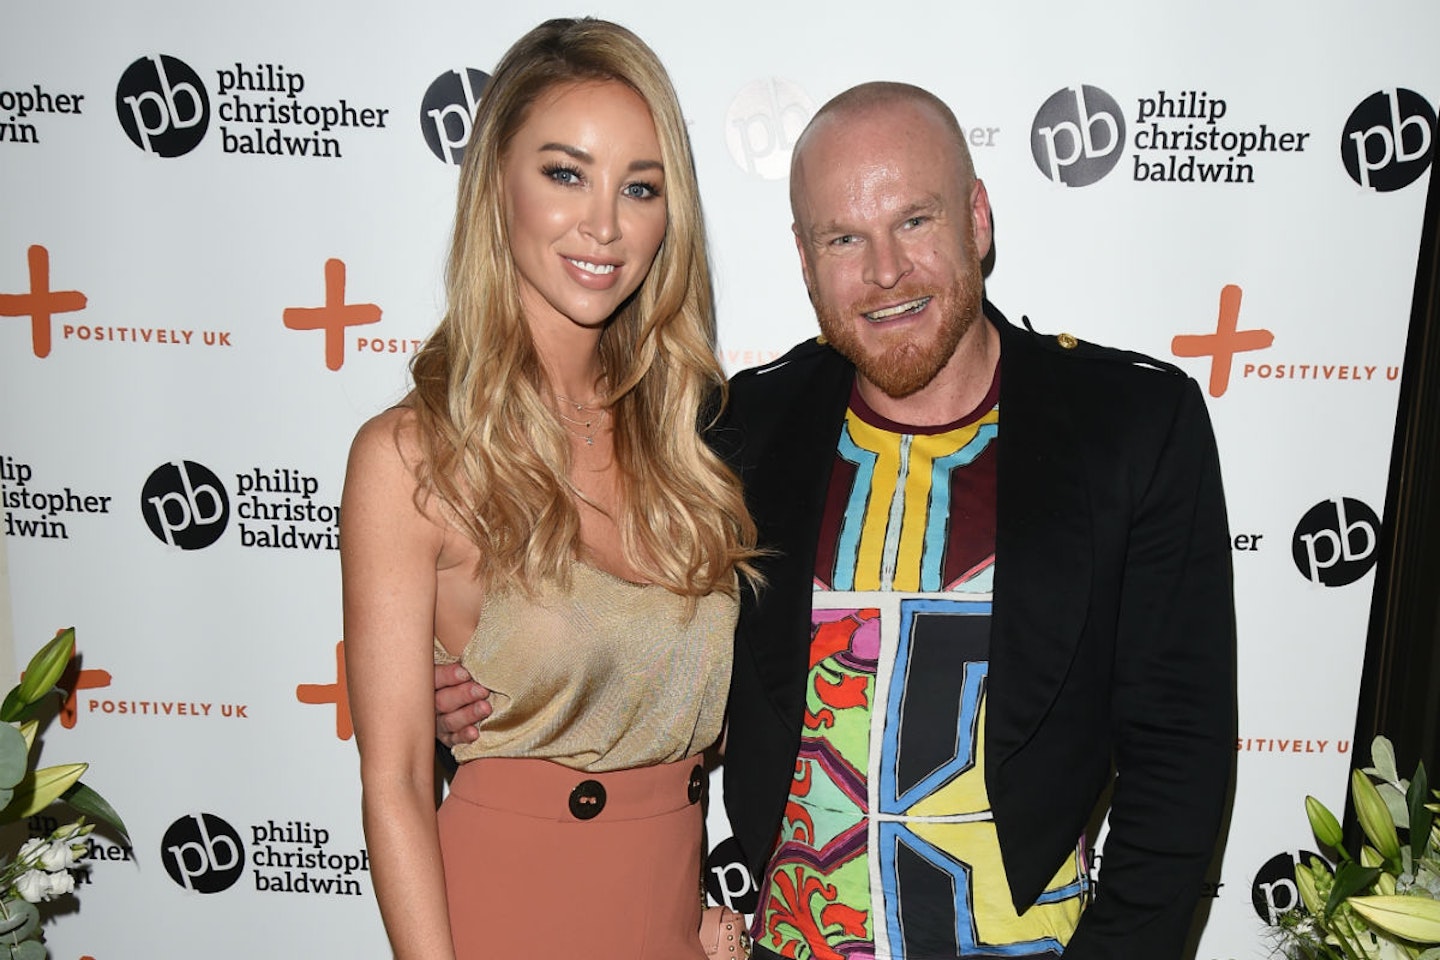 TOWIE's Chloe Meadows and Courtney Green supported the charity Lauren Pope caught up with Philip Christopher Baldwin